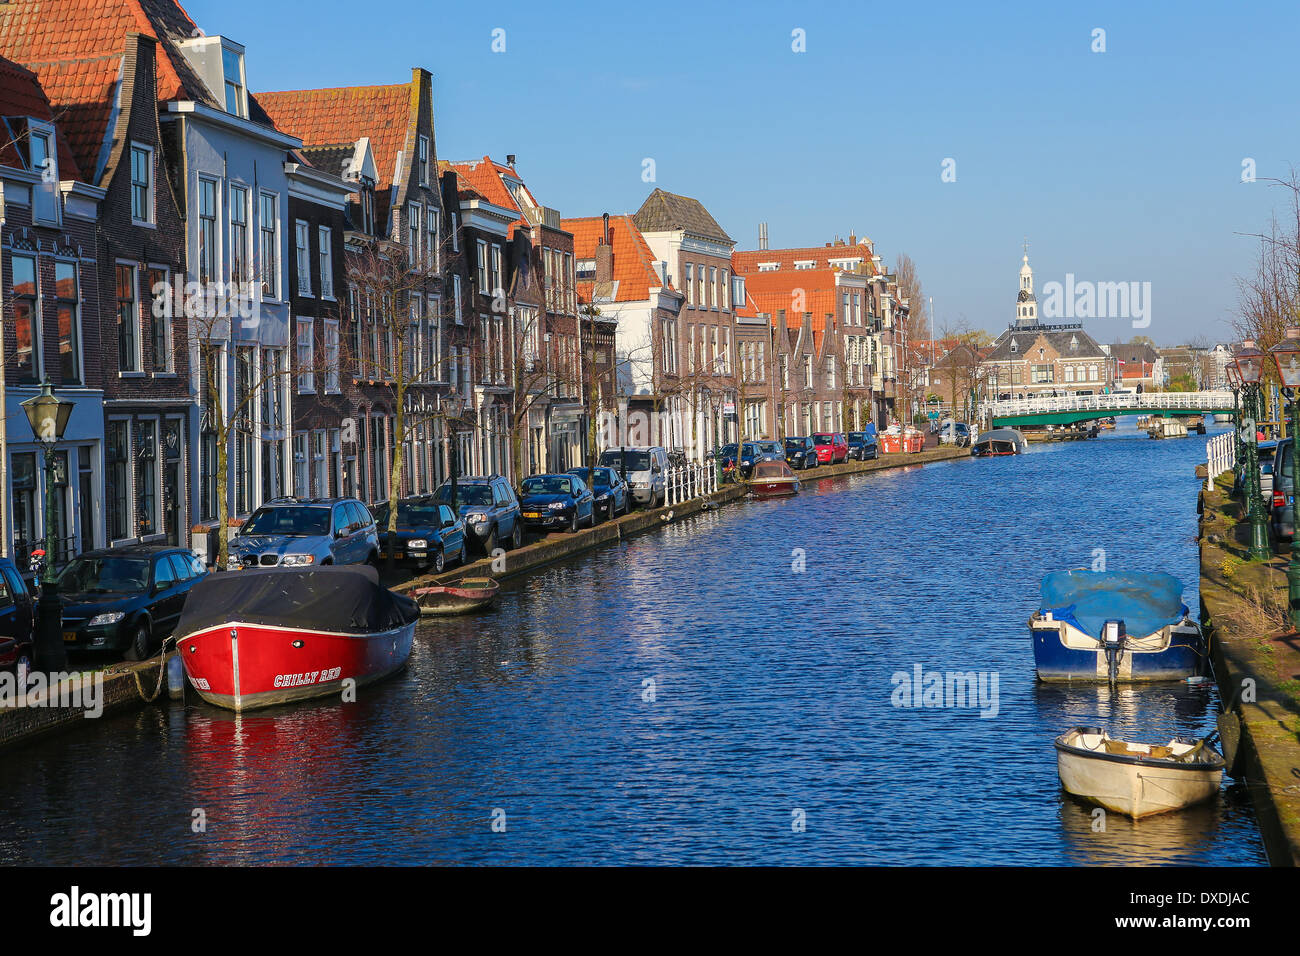 LEIDEN, THE NETHERLANDS - MARCH 16, 2014: The famous Old Rhine going through the center of Leiden, The Netherlands. Stock Photo